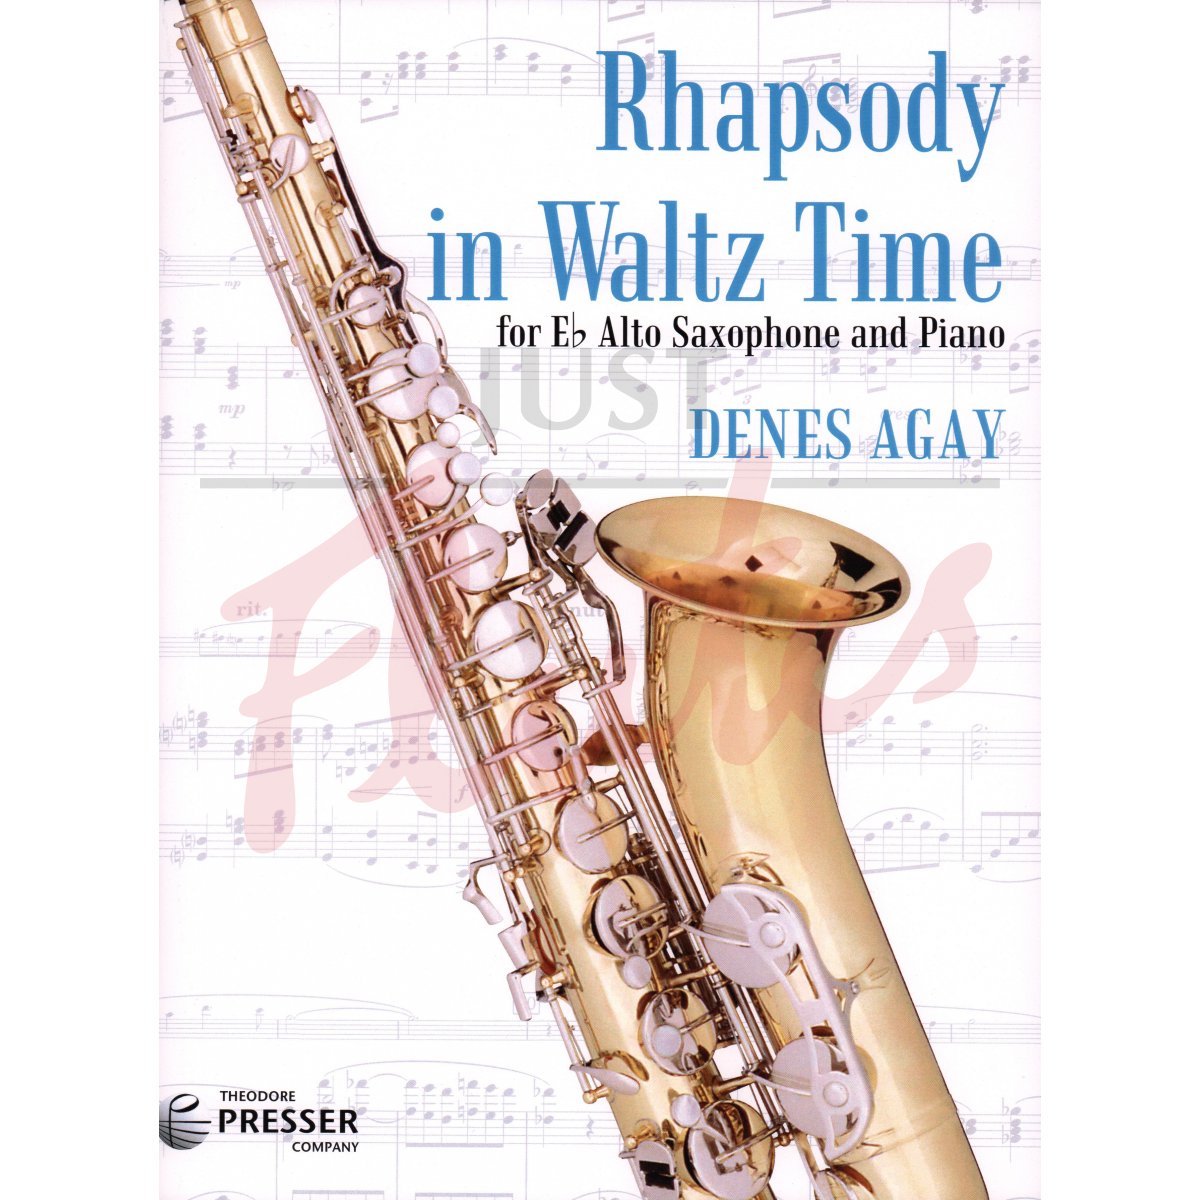 Rhapsody in Waltz Time for Alto Saxophone and Piano